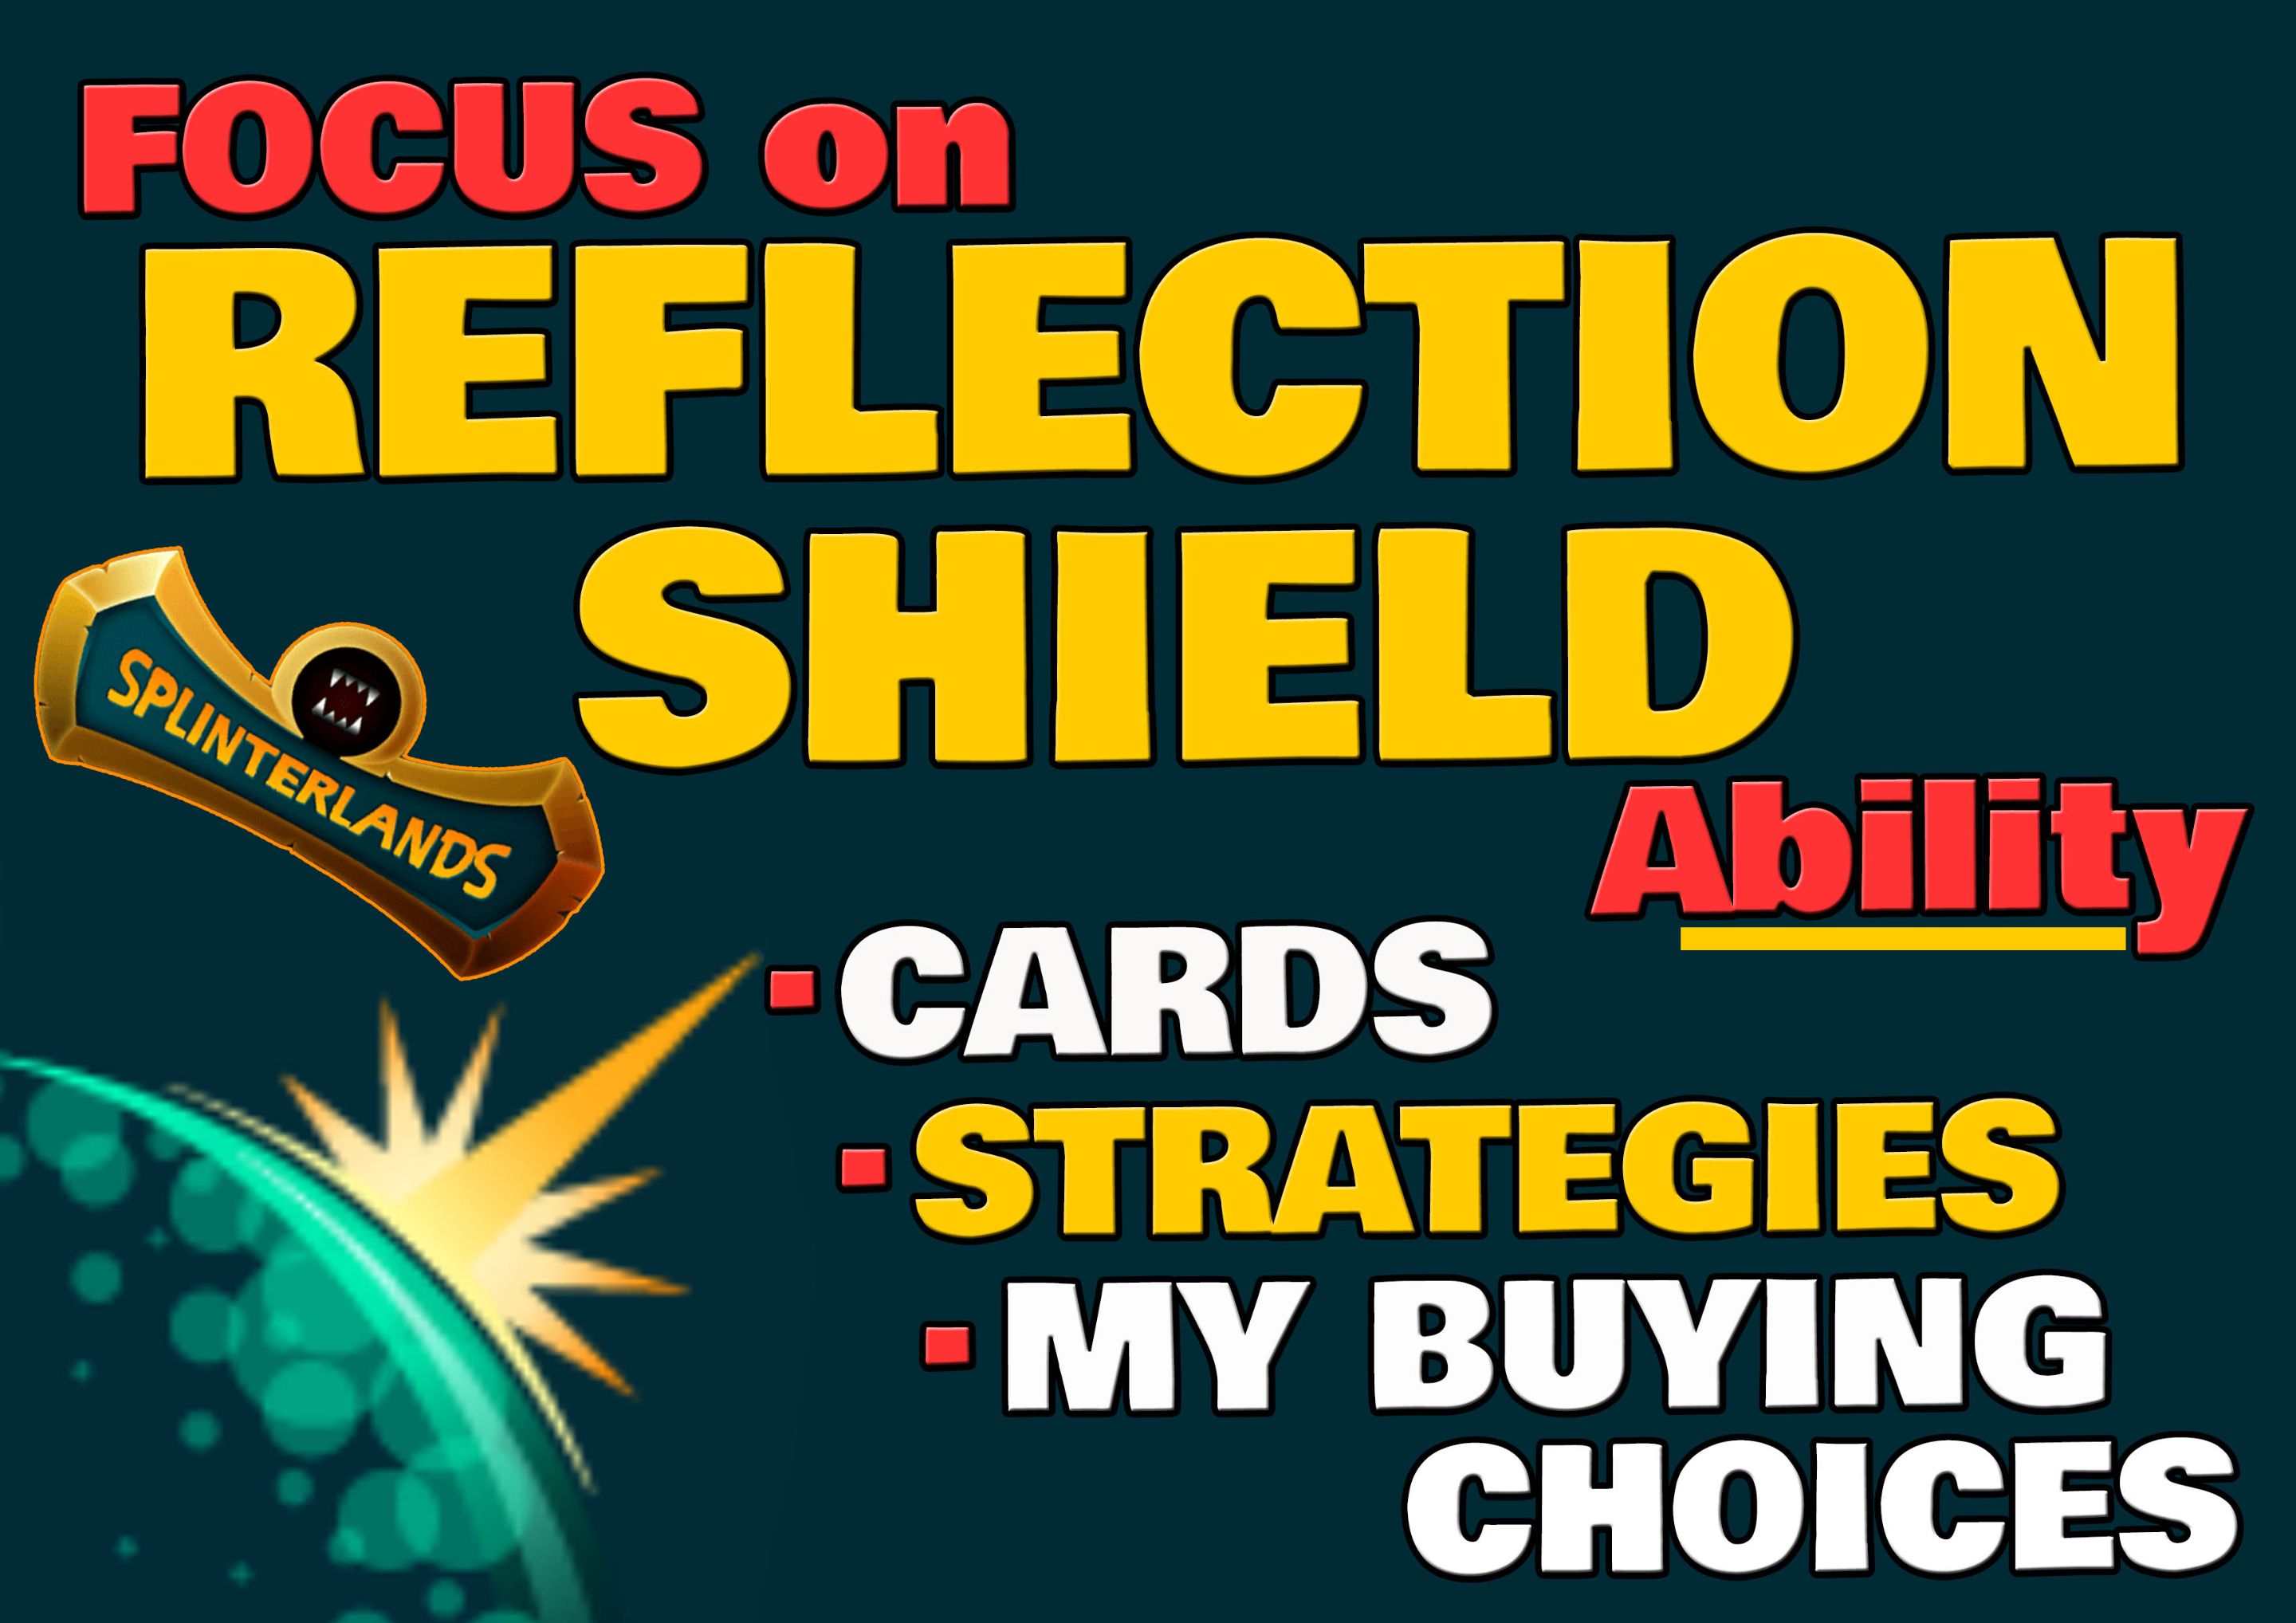 @libertycrypto27/focus-on-reflection-shield-ability-cards-strategies-my-buying-choices-engita